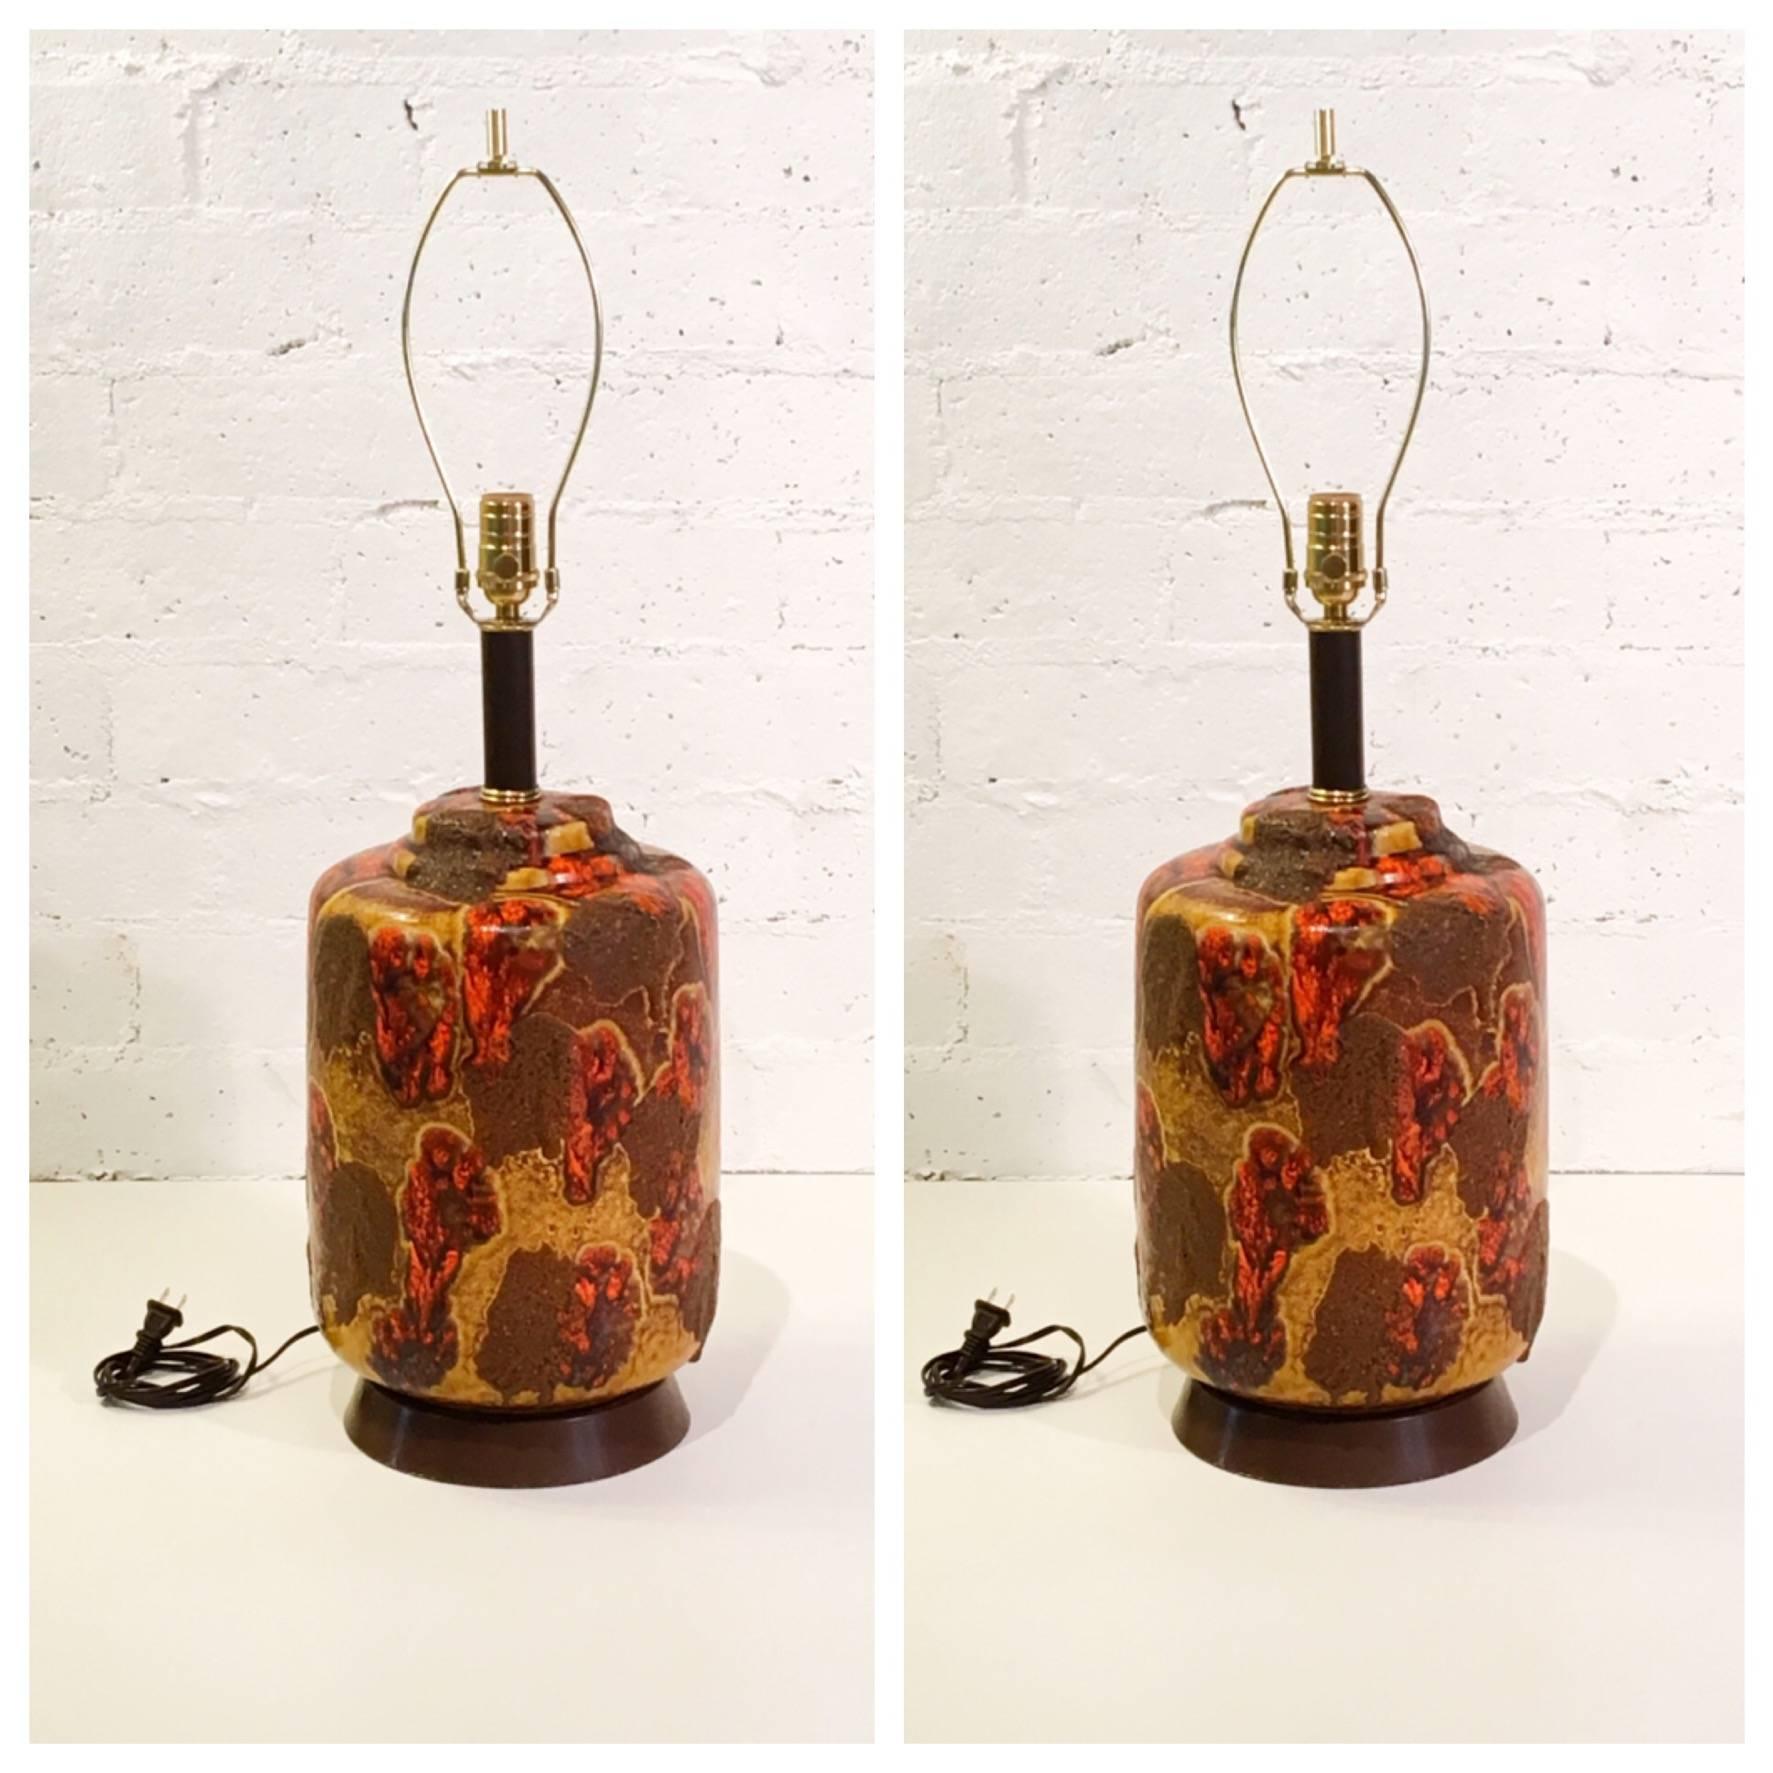 An amazing pair of 1960s ceramic table lamps with a orange, brown and mustard color volcanic drip glazed.
Newly rewired with all new brass hardware and new oatmeal color linen shades.
 